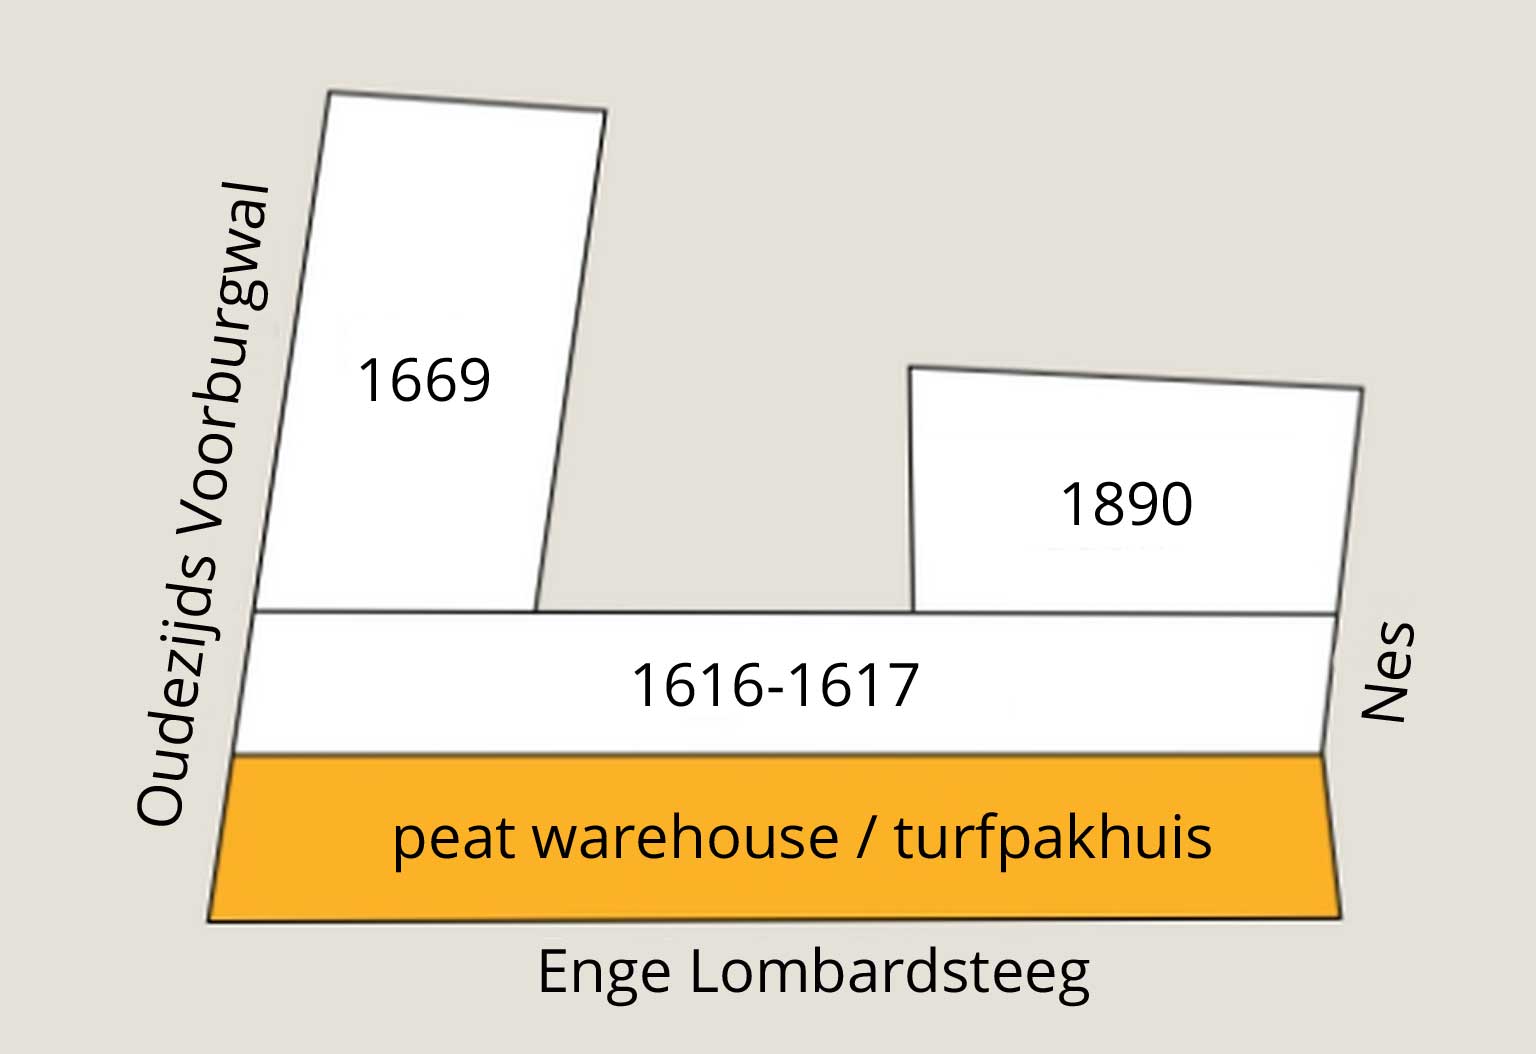 Schematic plan of the buildings of the Stadsbank van Lening (City Pawn Bank), Amsterdam